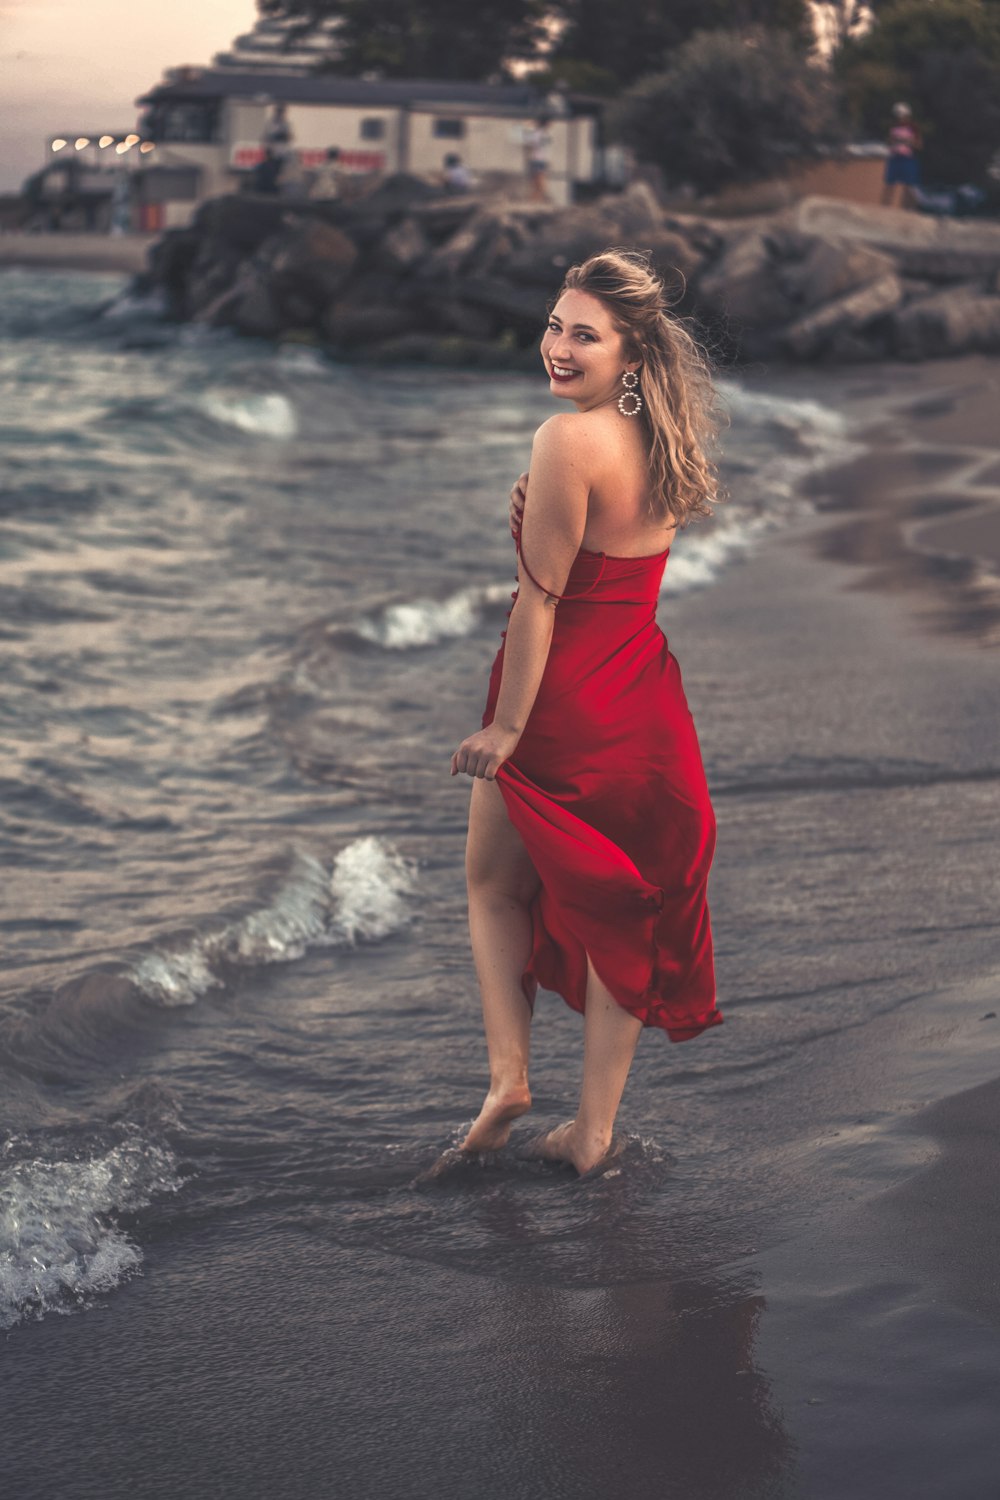 woman in red spaghetti strap dress standing on beach during daytime